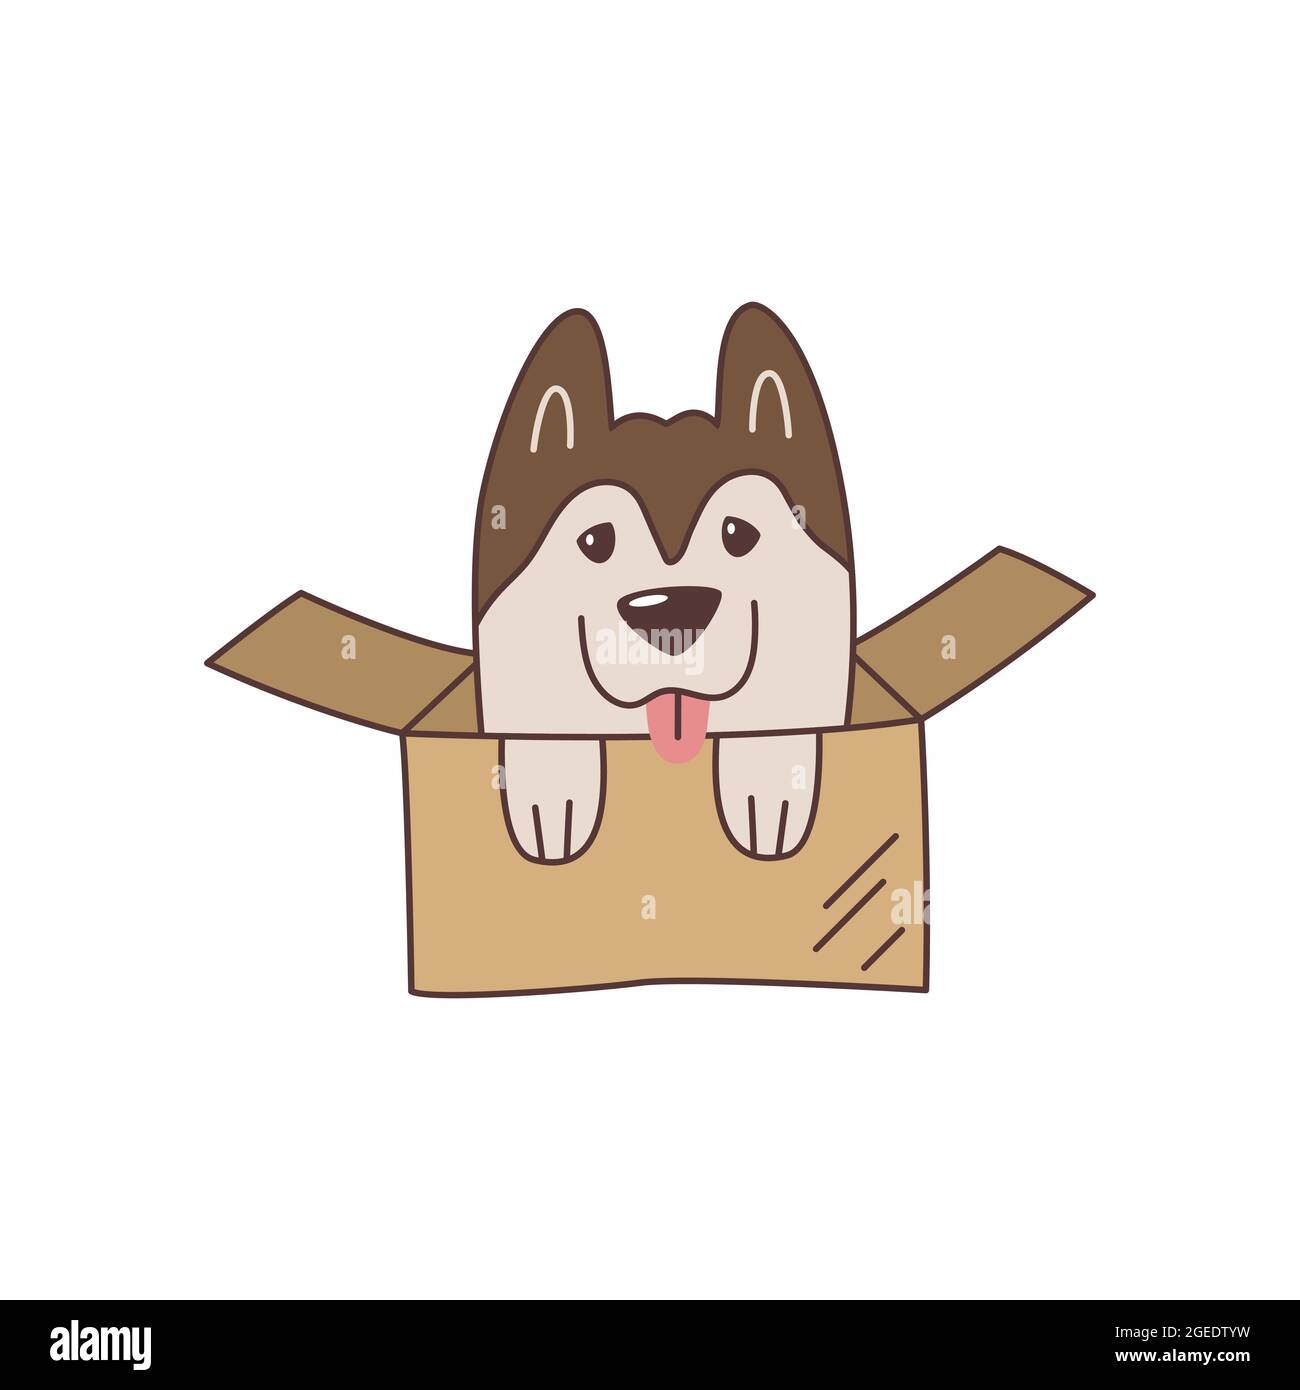 Cute kawaii husky puppy in cardboard box. Playful cartoon dog with tongue. Unusual surprise gift. Emblem, logo, label for friendly parcel delivery Stock Vector